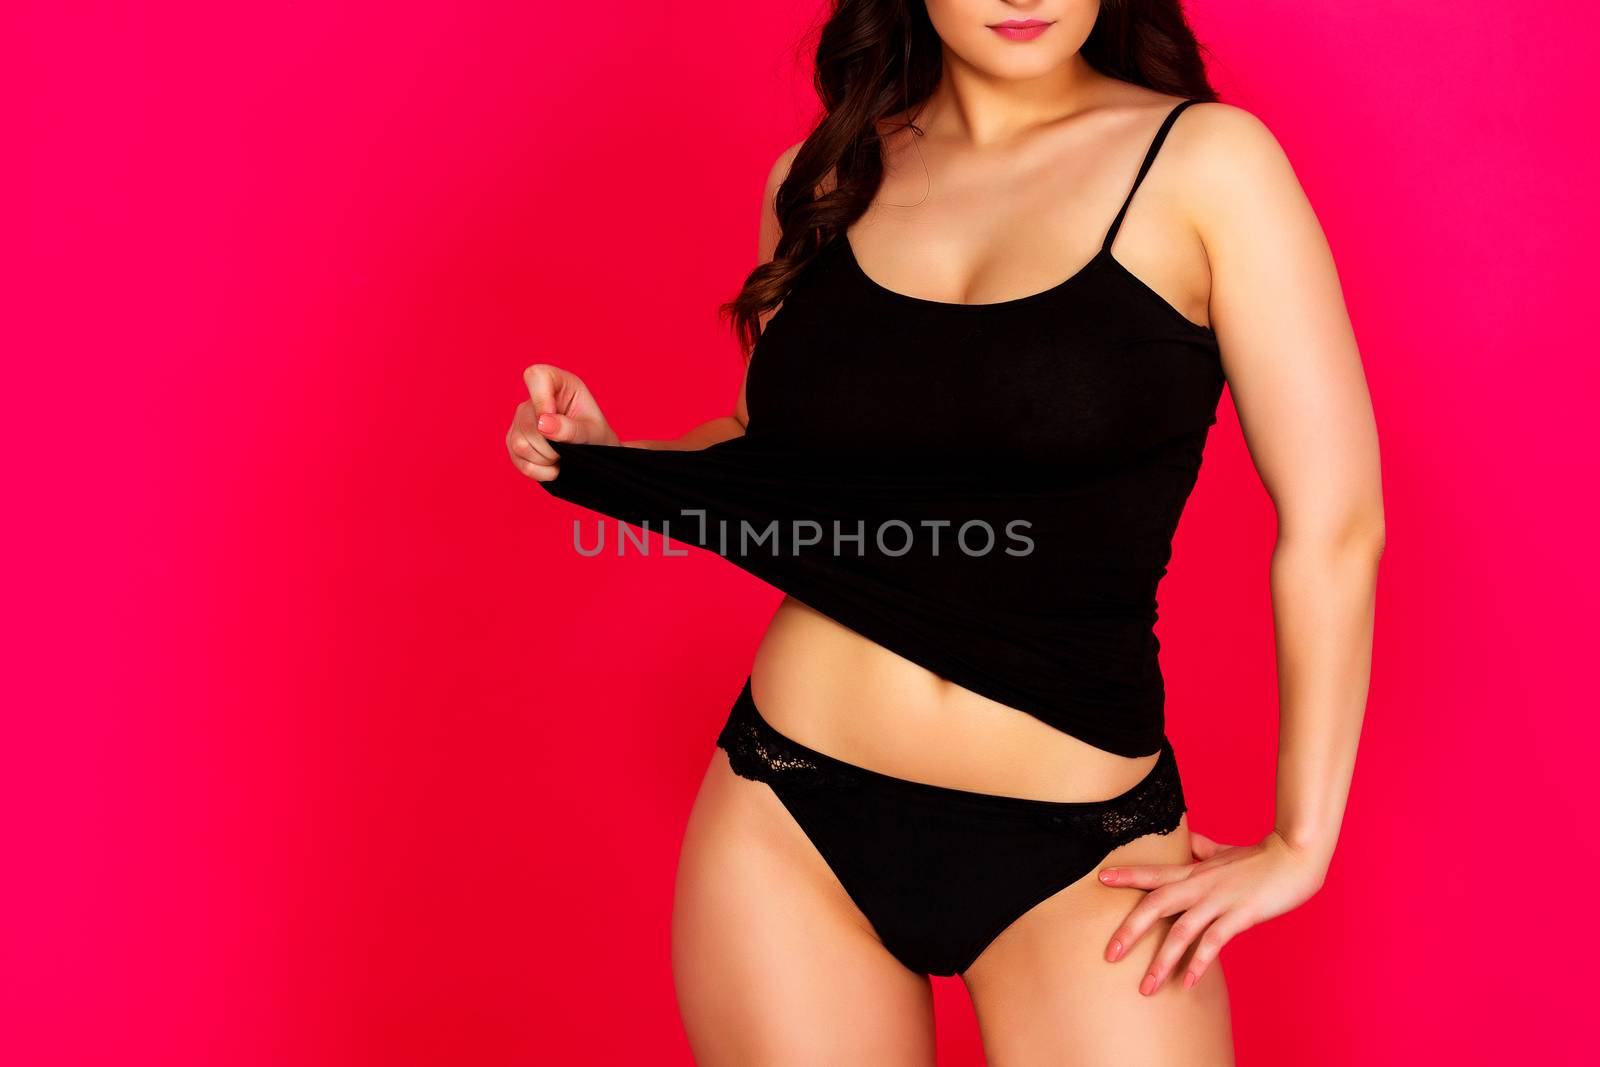 Woman with sexy body posing against a red background by Nobilior